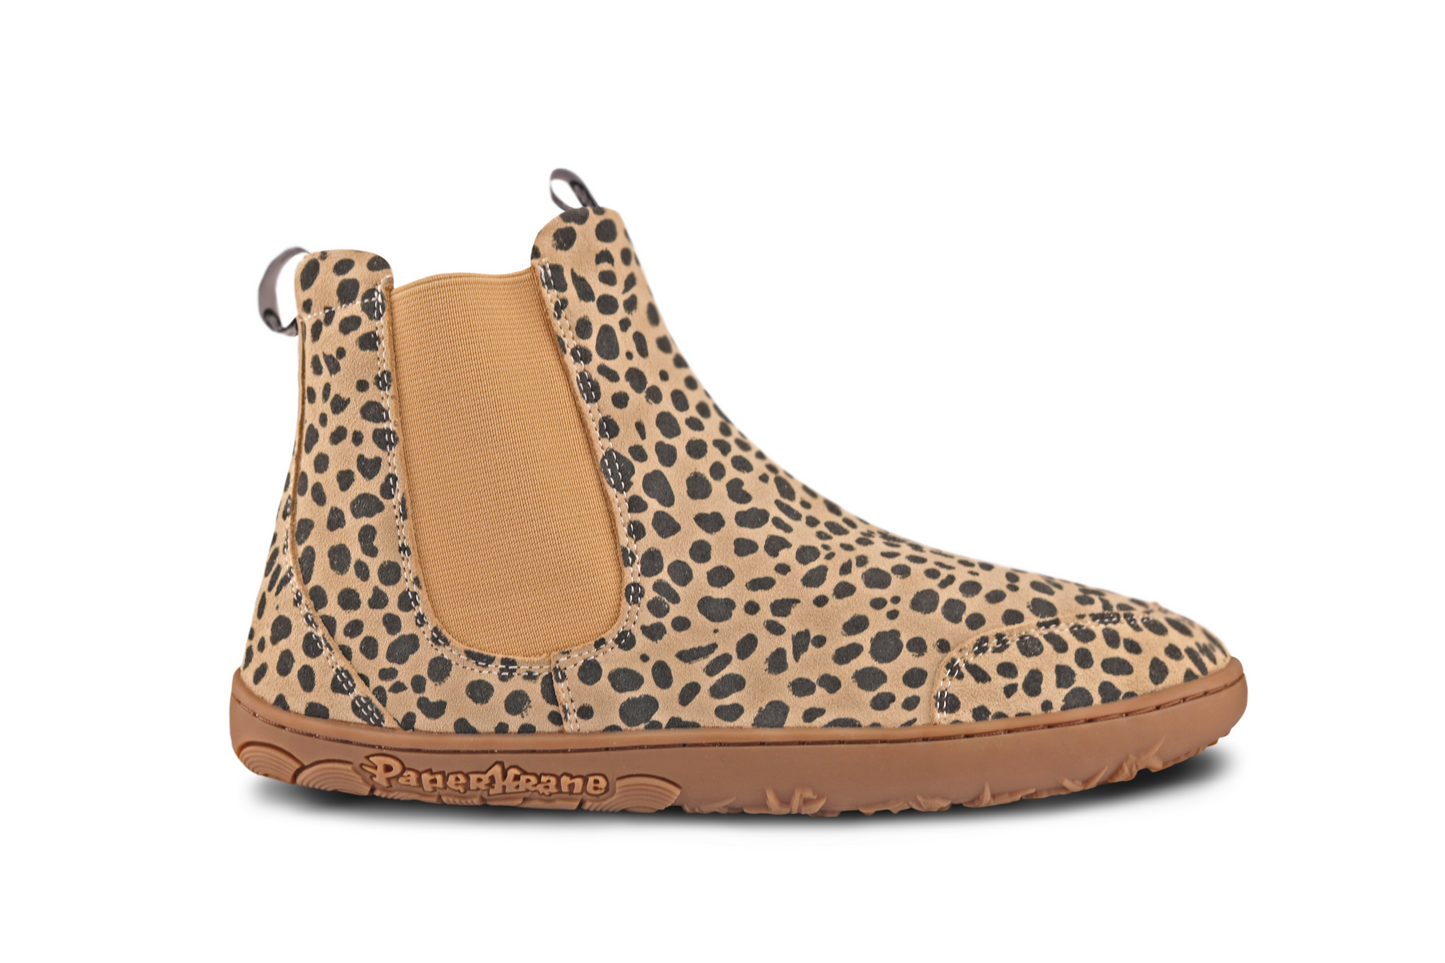 OUTSIDE VIEW OF CHEETAH BOOTS